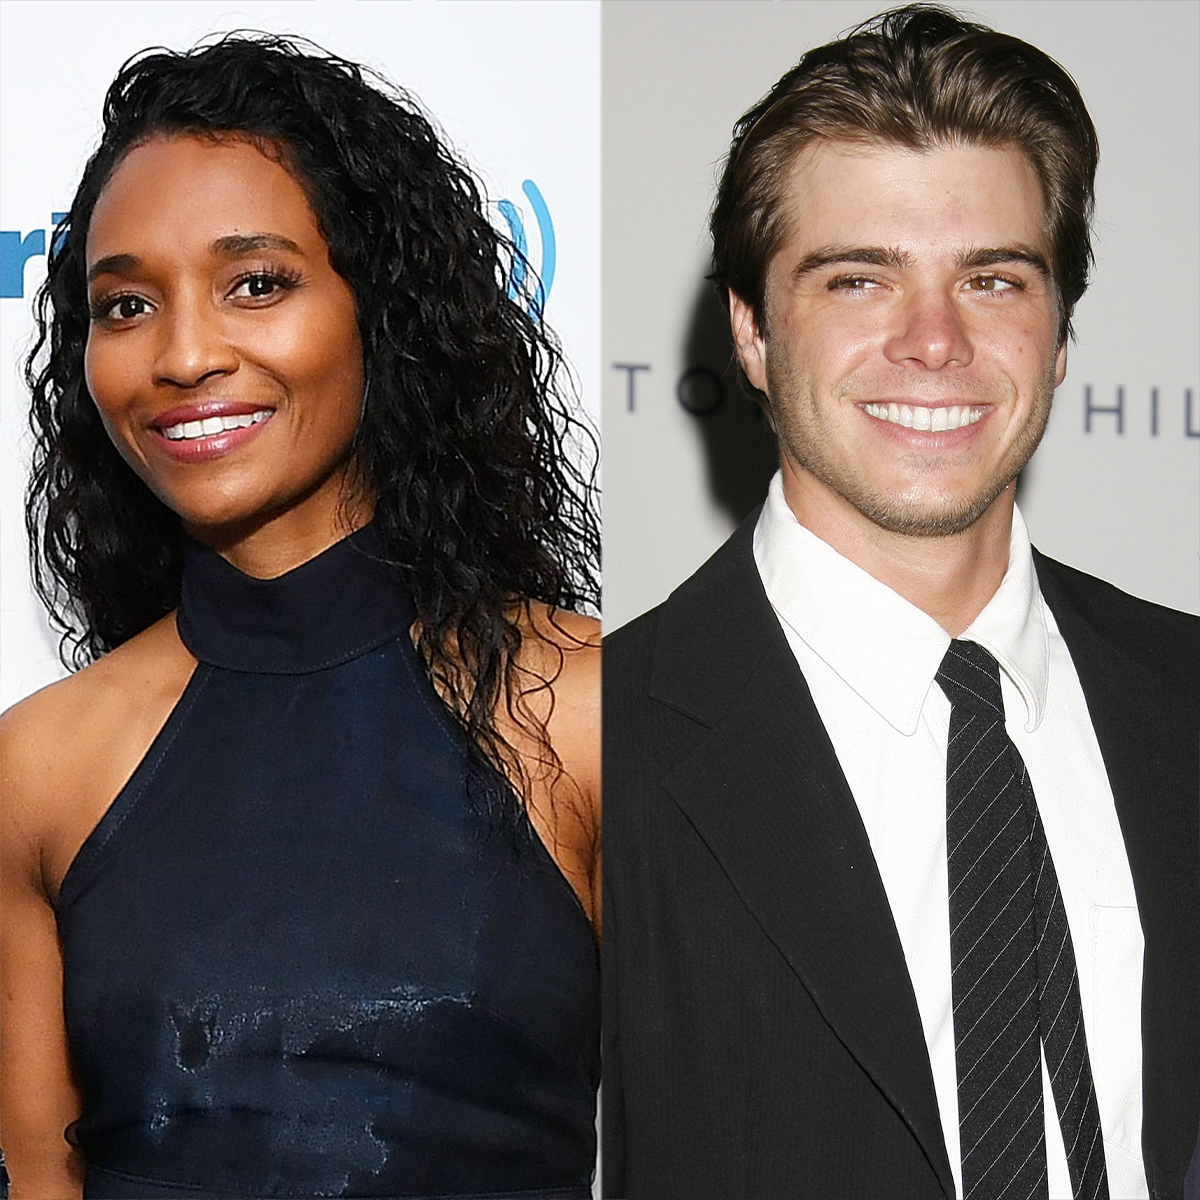 Chilli Posts About “Perfect Timing” Amid Matthew Lawrence Romance